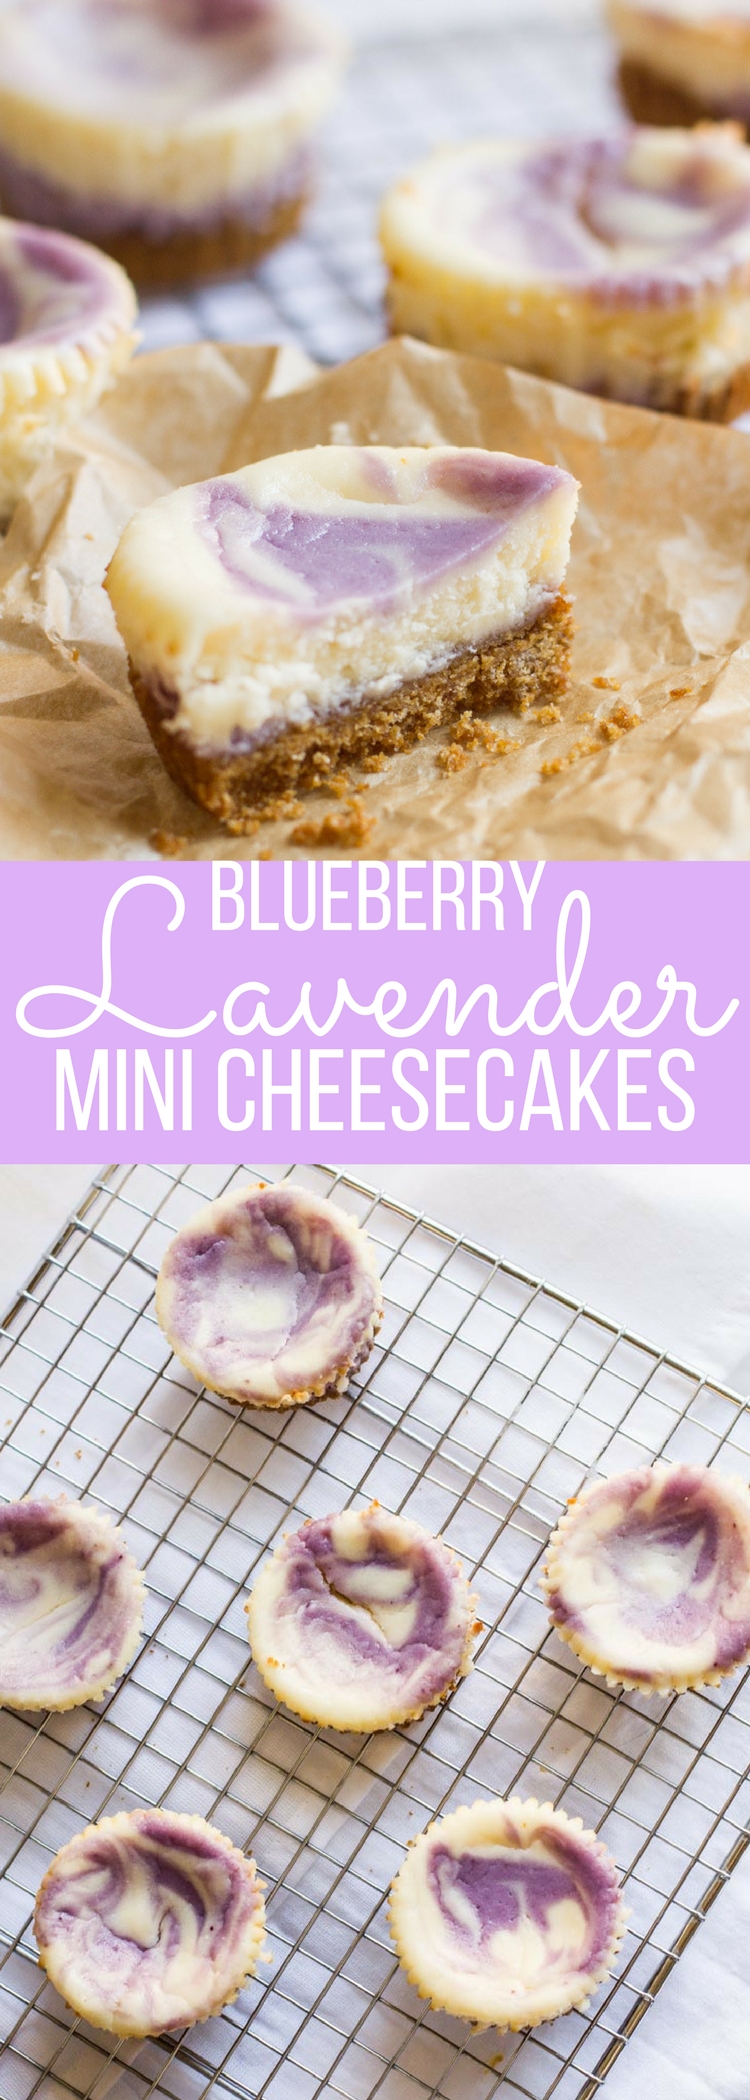 Blueberry Lavender Mini Cheesecakes are a cute addition to any springtime party. With a blueberry lavender swirl, they're light, fruity, floral and fun!